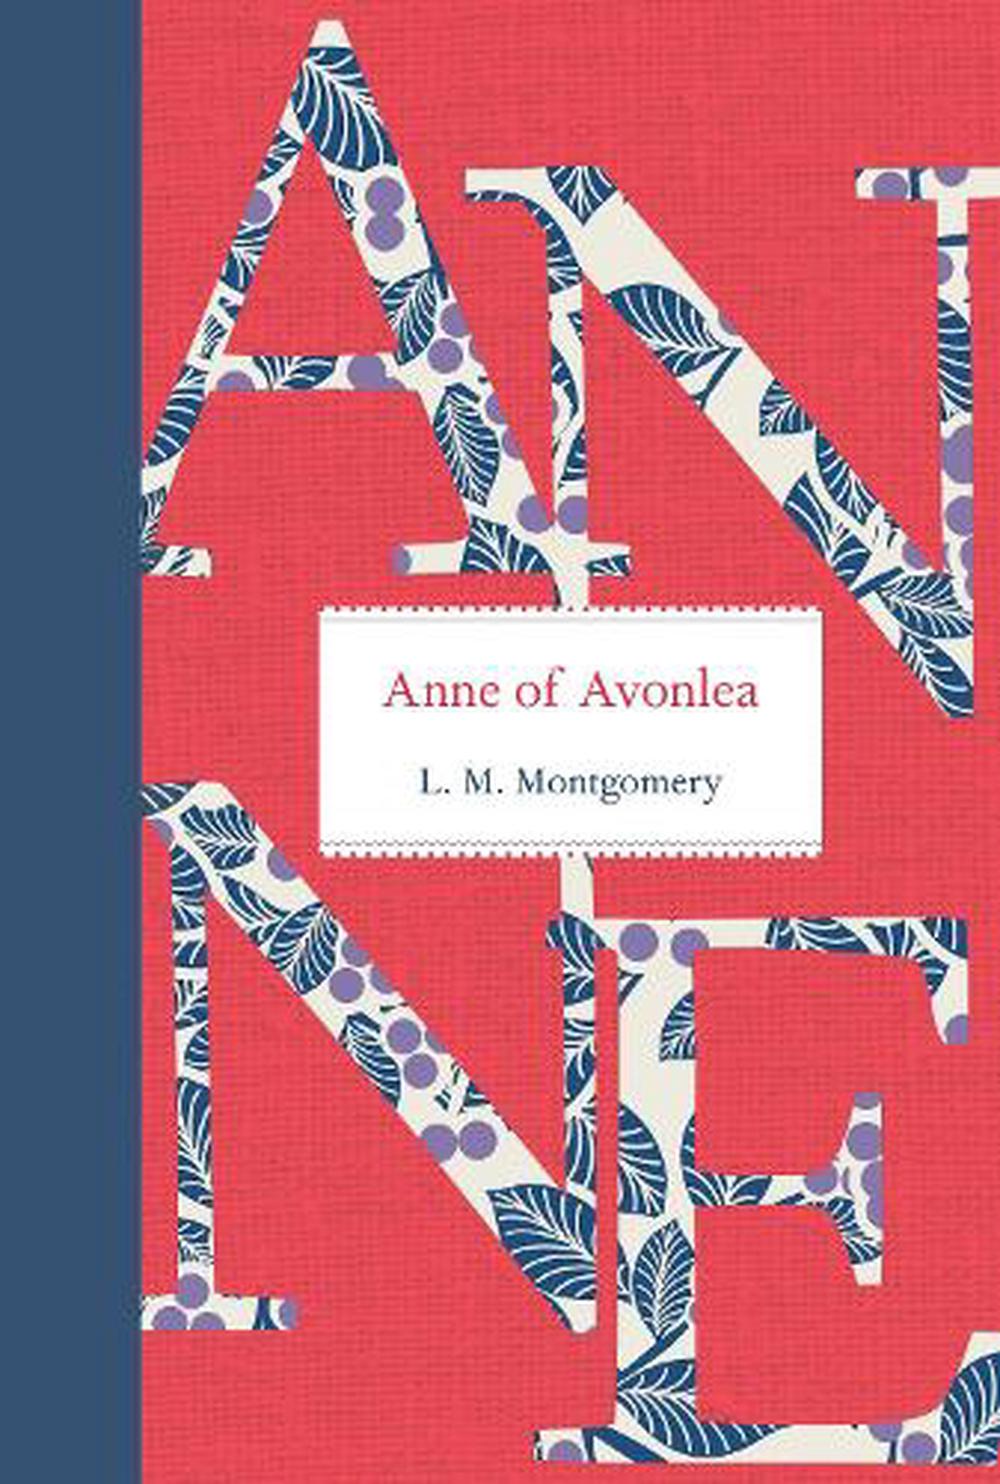 anne of avonlea by lm montgomery